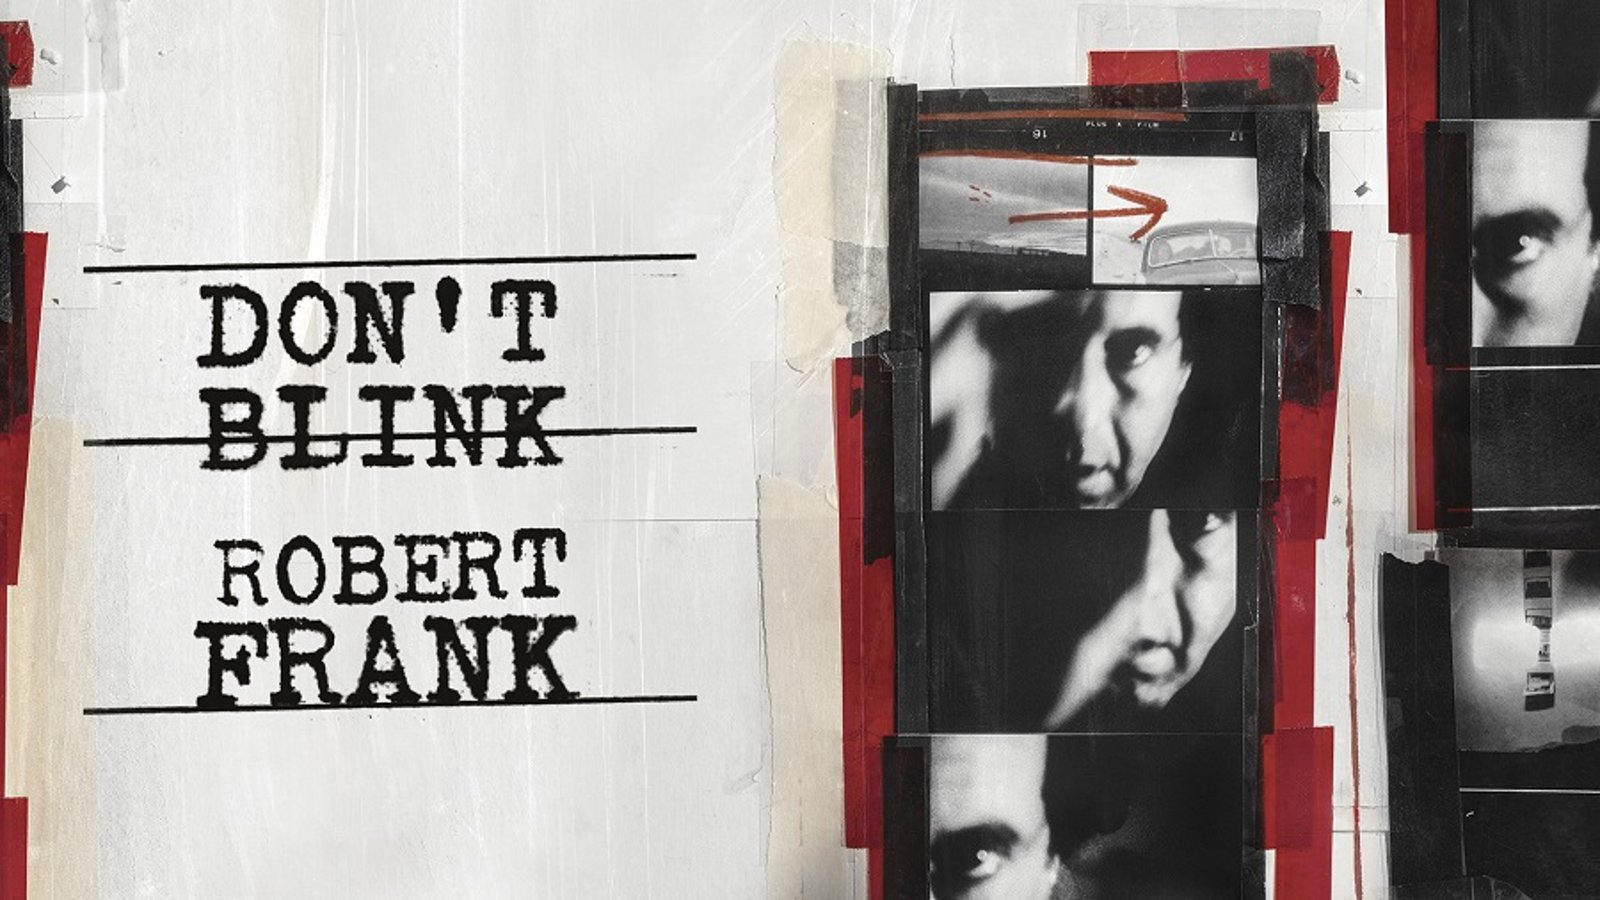 Don't Blink: Robert Frank - A Revolutionary of Photography and Independent Film